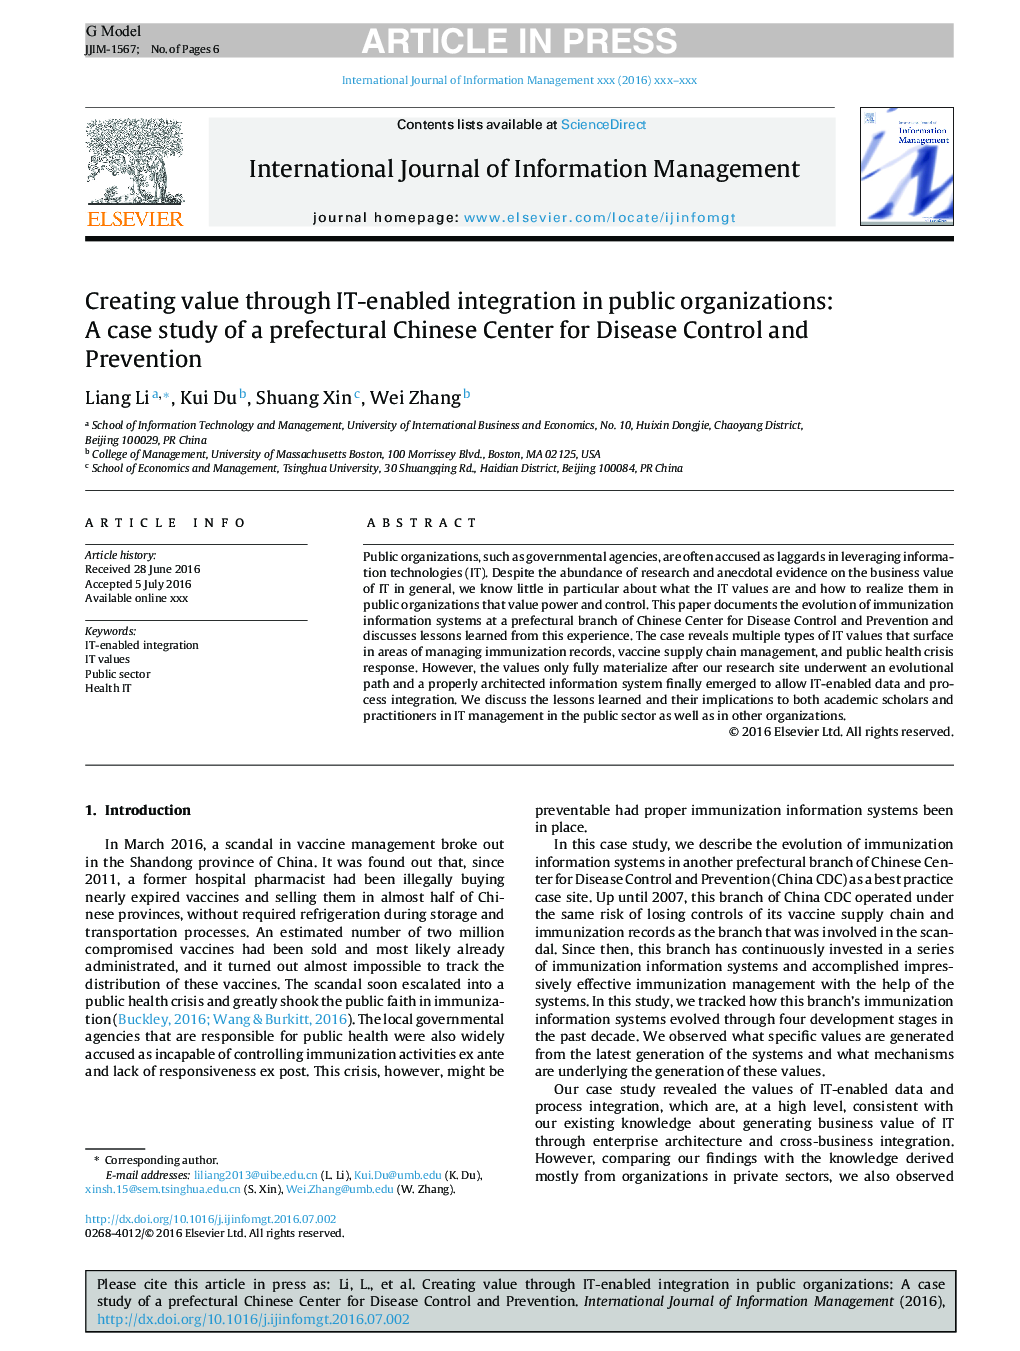 Creating value through IT-enabled integration in public organizations: A case study of a prefectural Chinese Center for Disease Control and Prevention